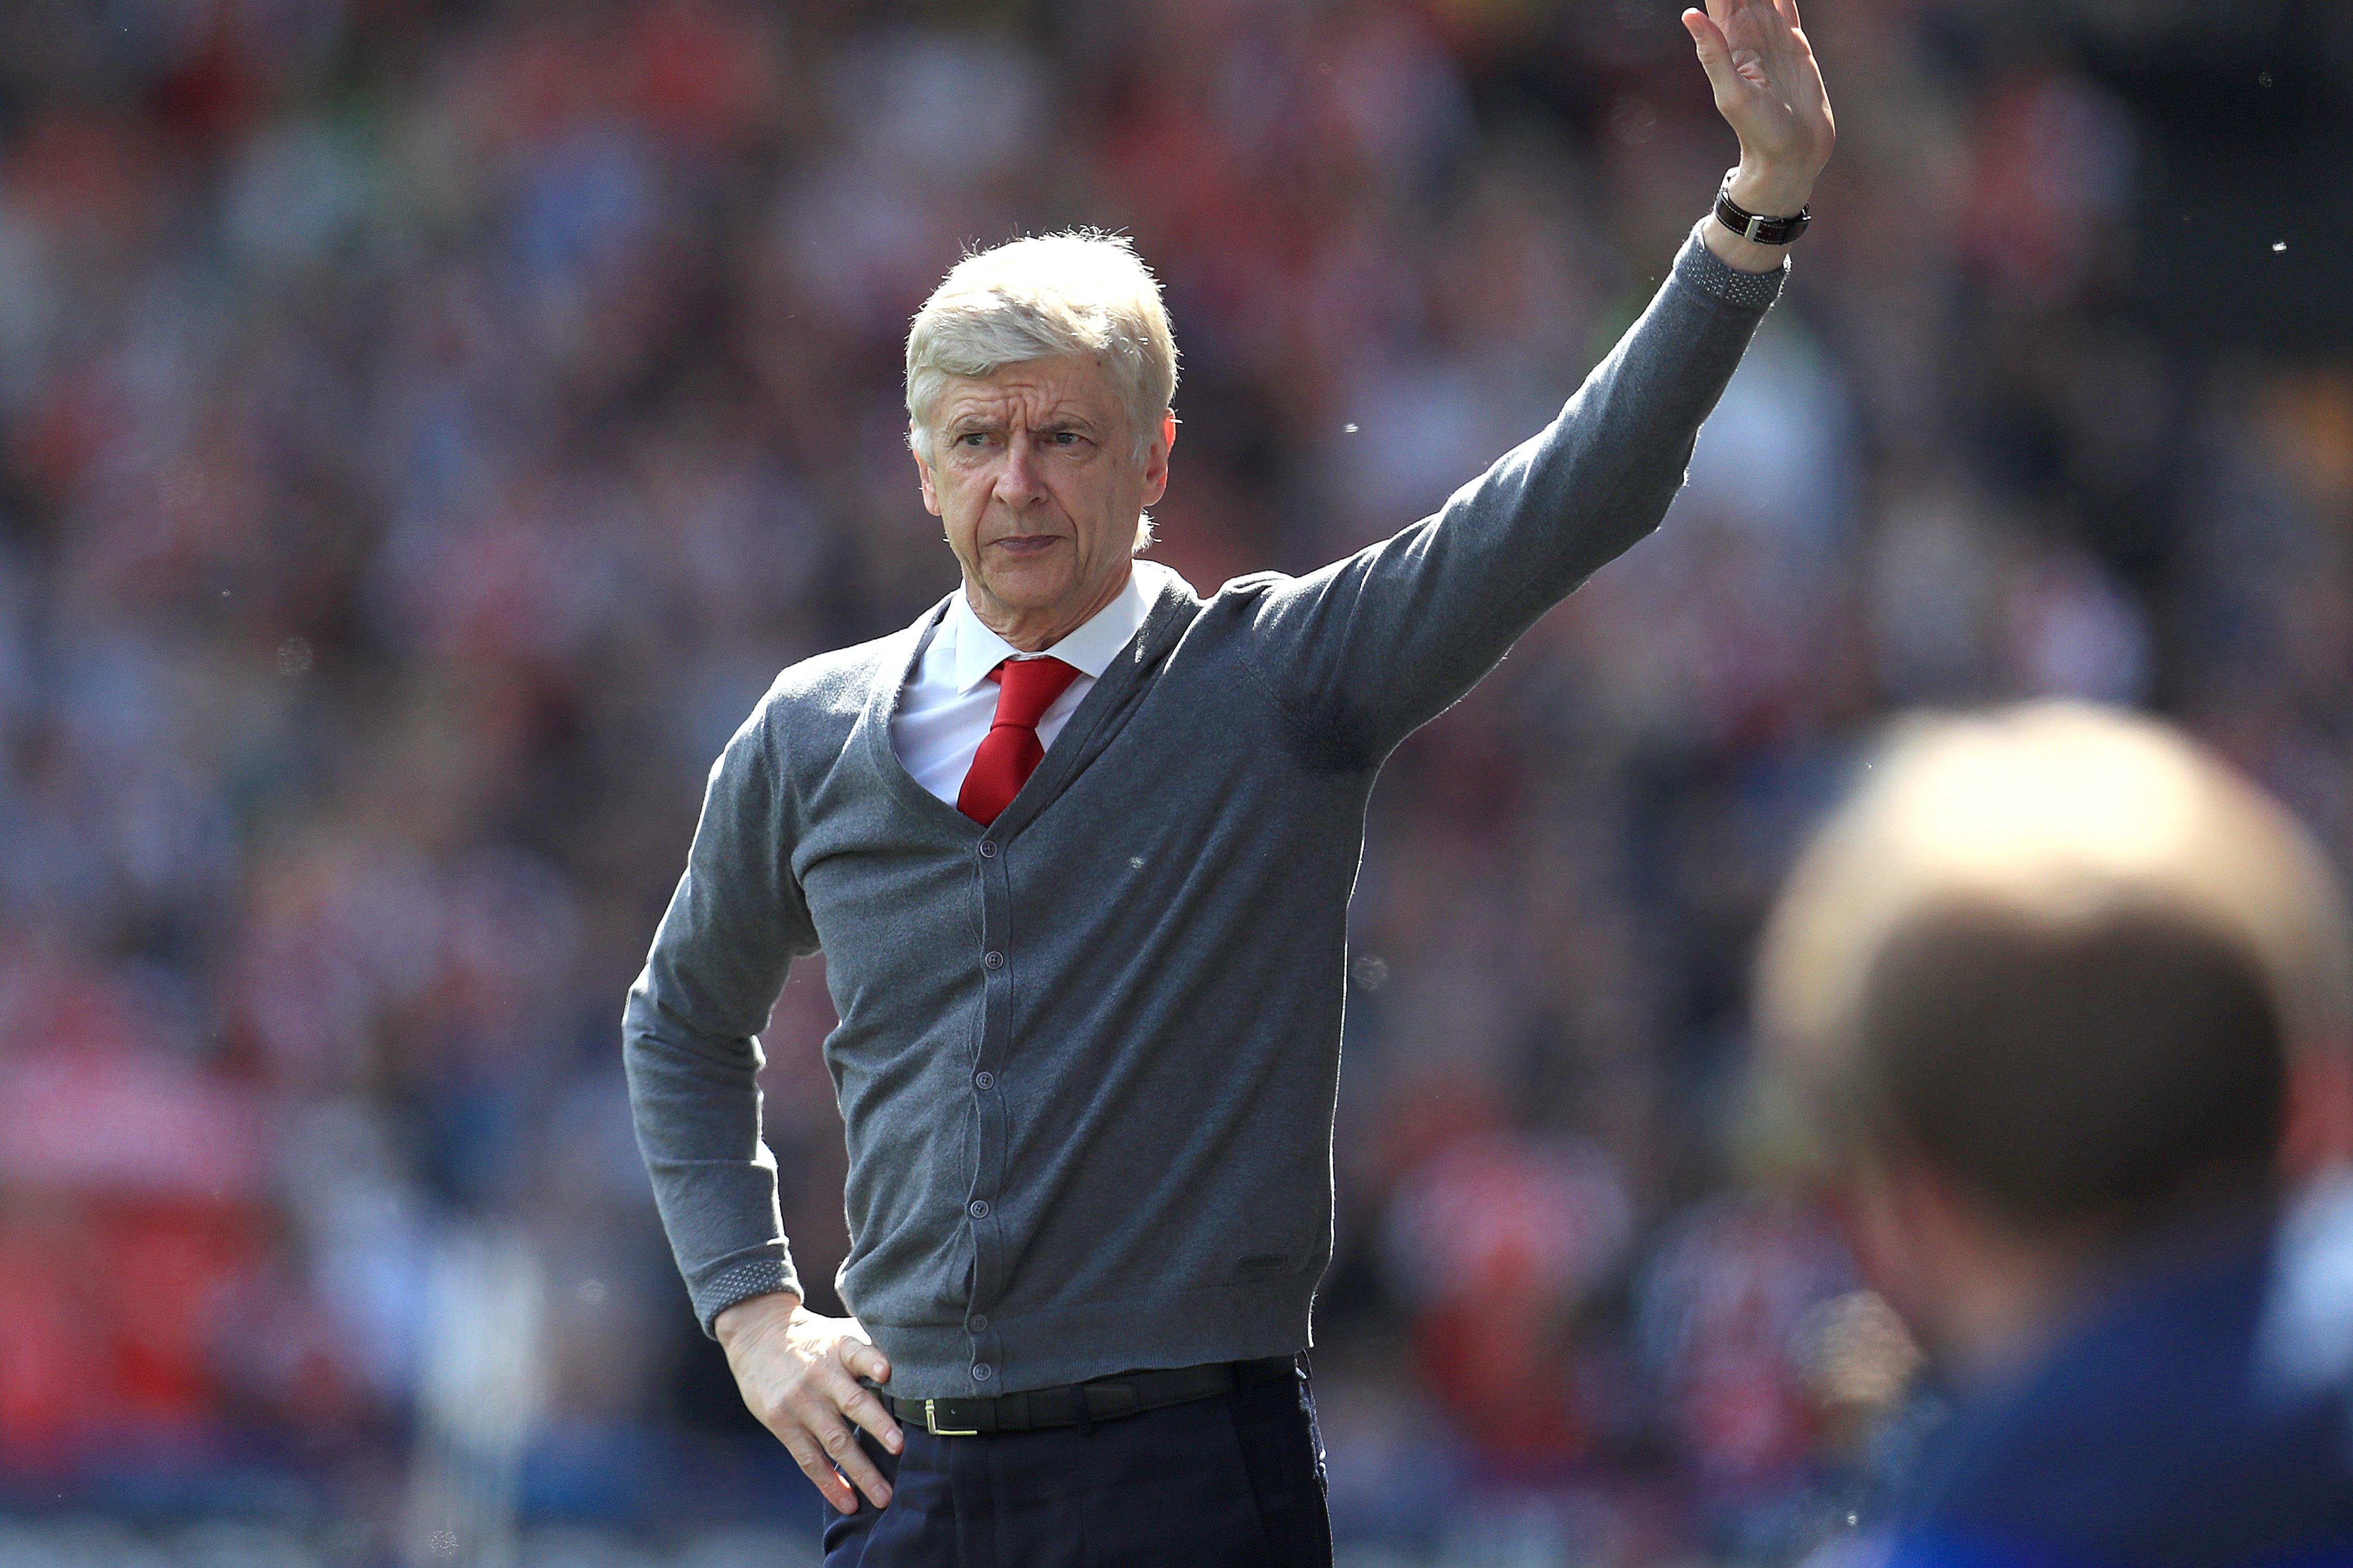 Arsene Wenger’s match in the Arsenal hotseat was at Huddersfield (Mike Egerton/PA)